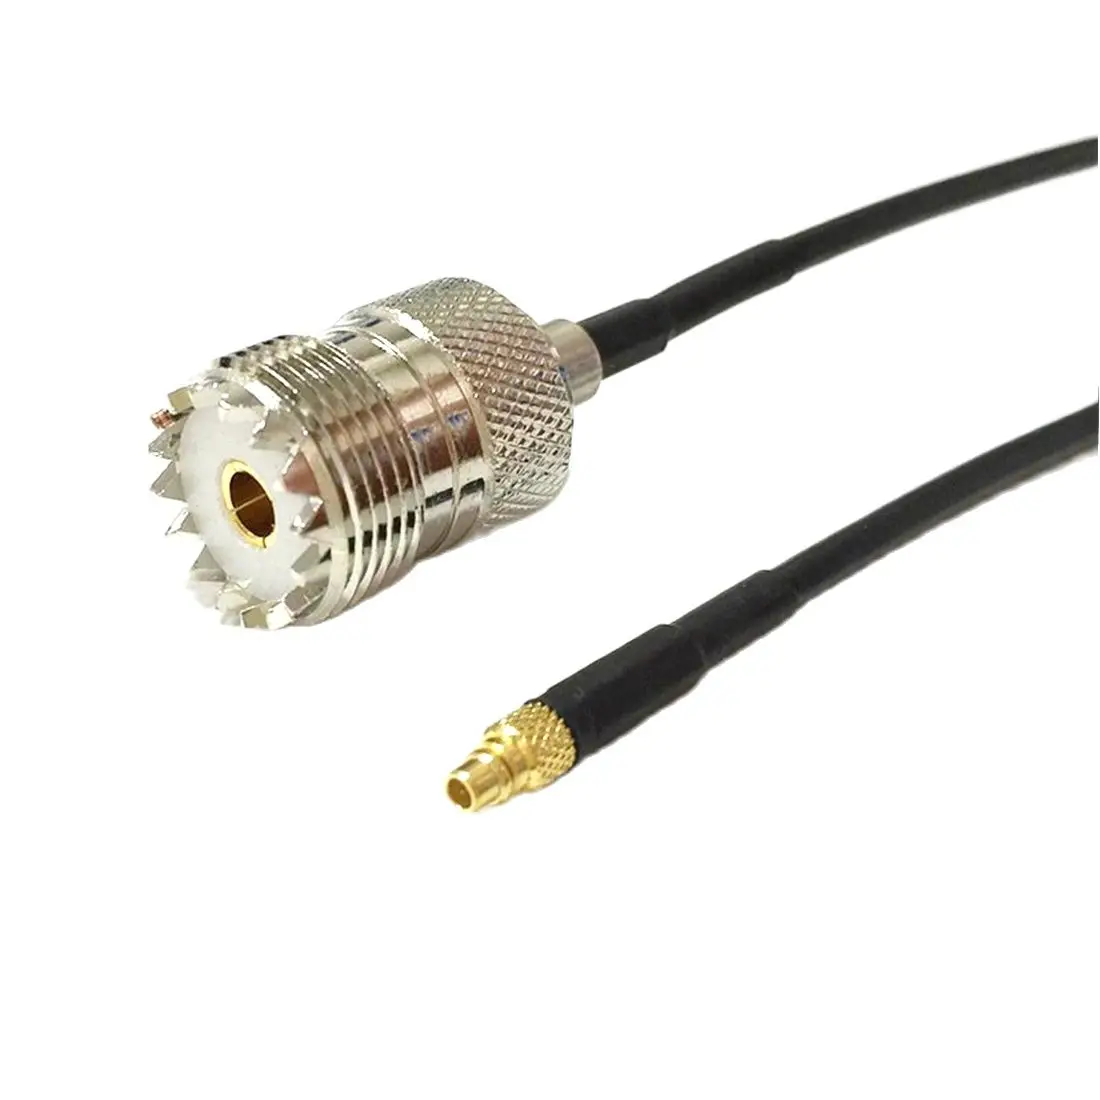 New Modem Coaxial Cable UHF Female Jack Connector Switch MMCX Male Plug Connector RG174 Cable 20CM 8inch Adapter hot 2 way port tv signal mixer satellite coaxial combiners cable switch for ant sat vhf uhf diplexer combiner splitter